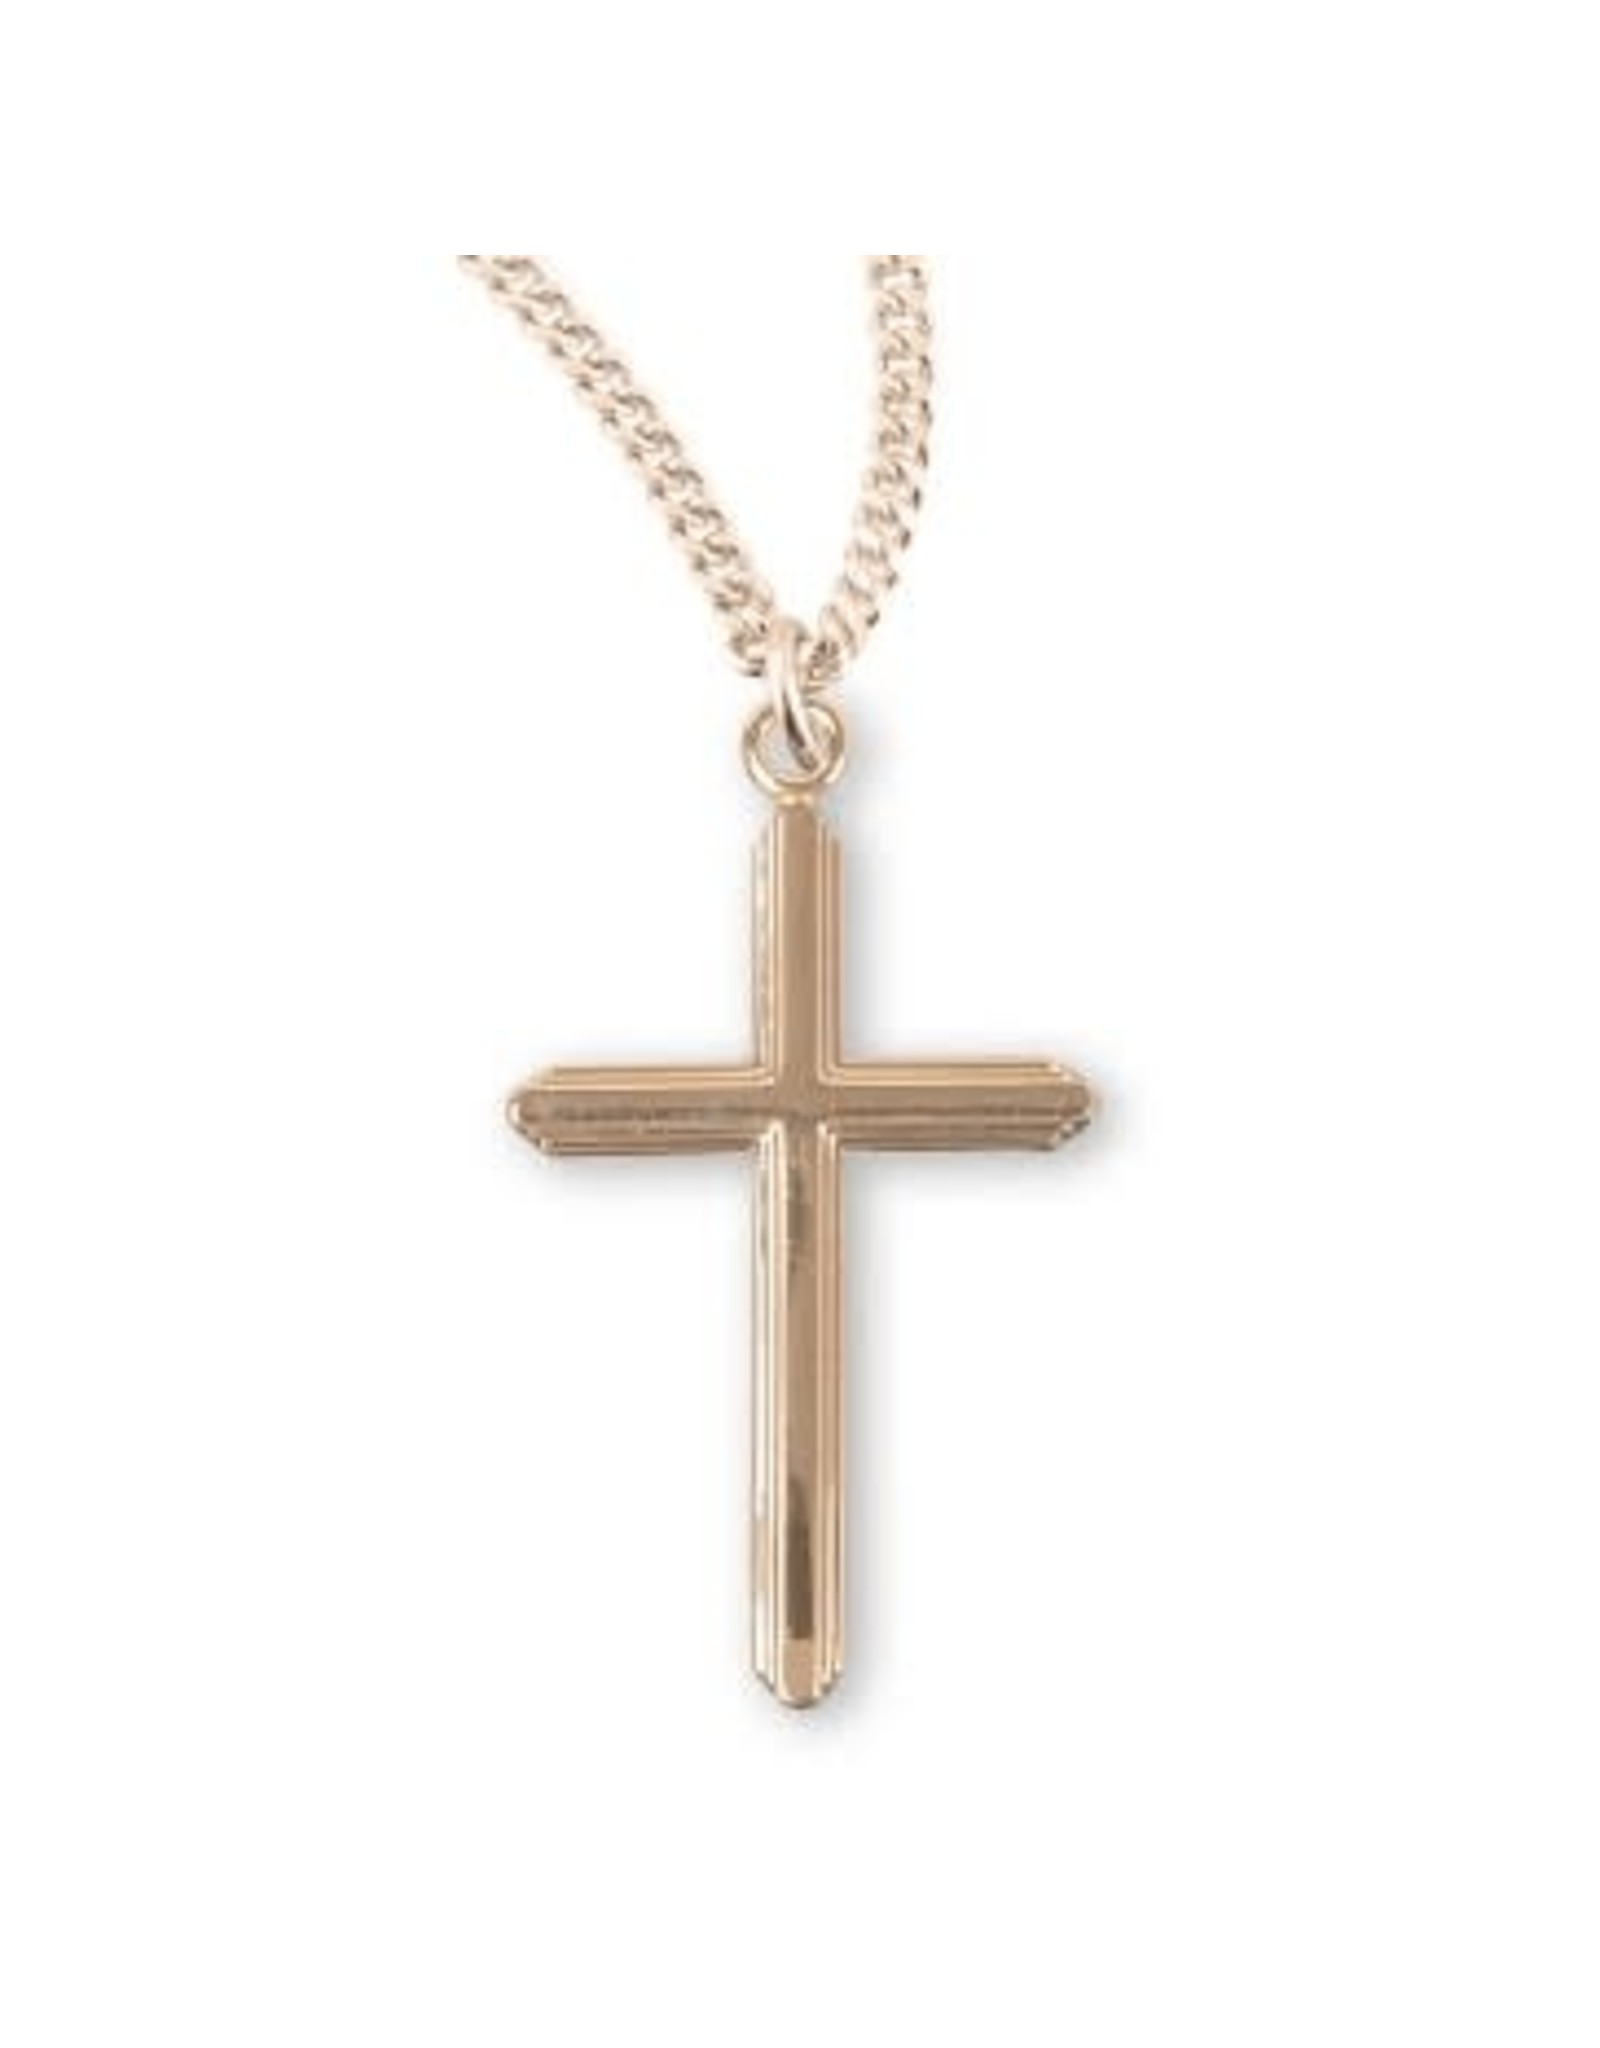 HMH Religious Manufacturing Cross Medal, Gold Over Sterling Silver, 18" Chain